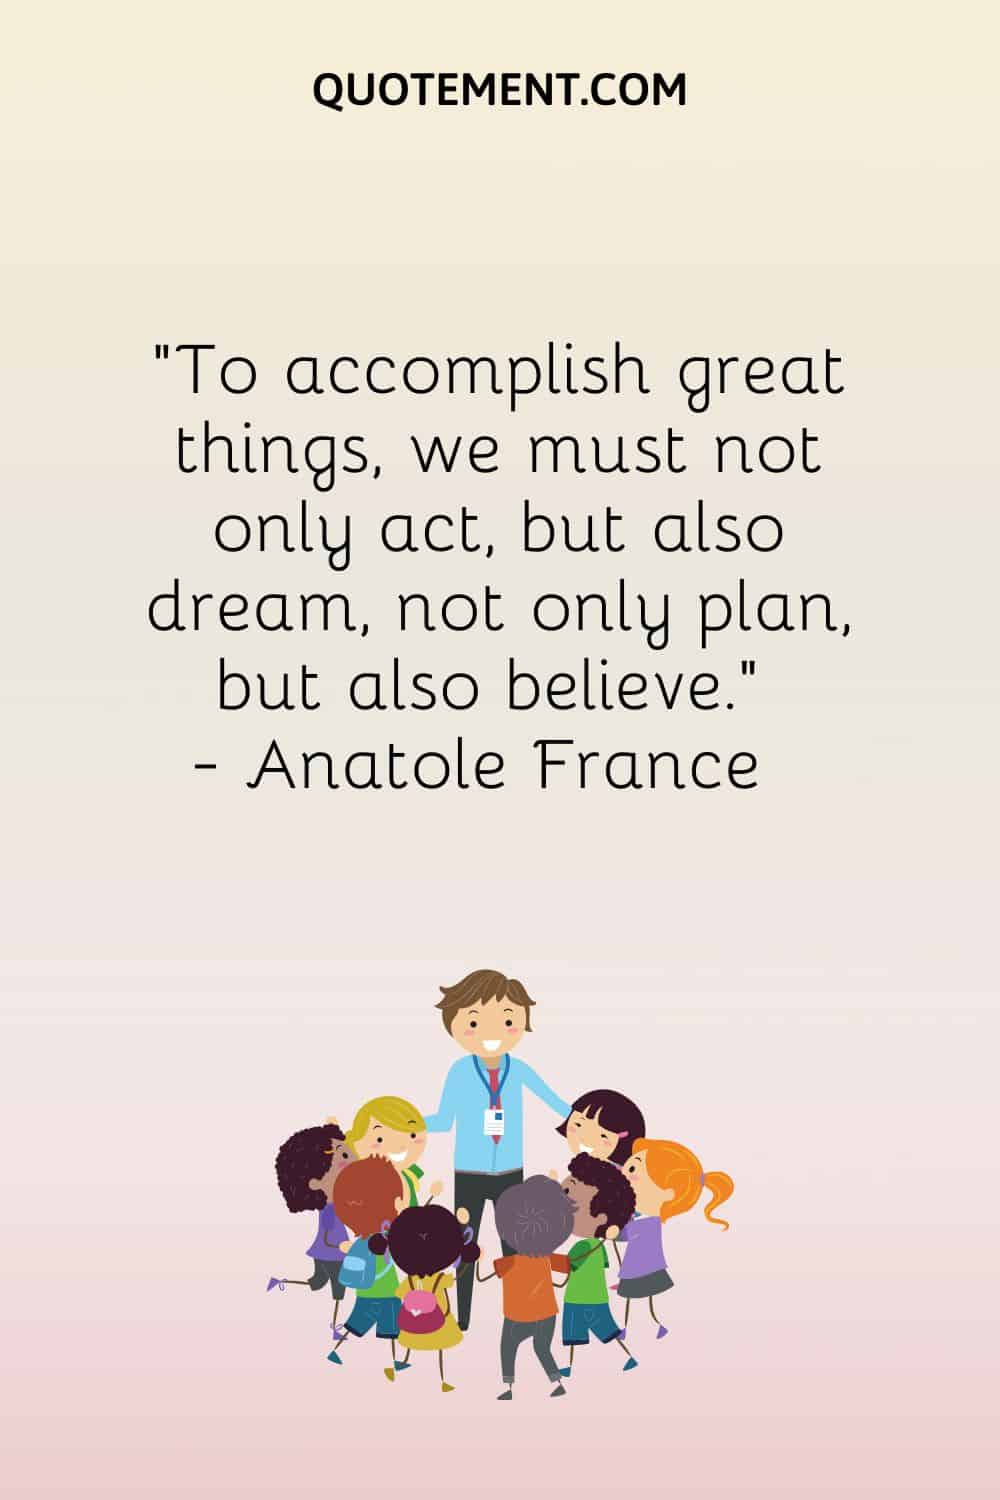 To accomplish great things, we must not only act, but also dream, not only plan, but also believe